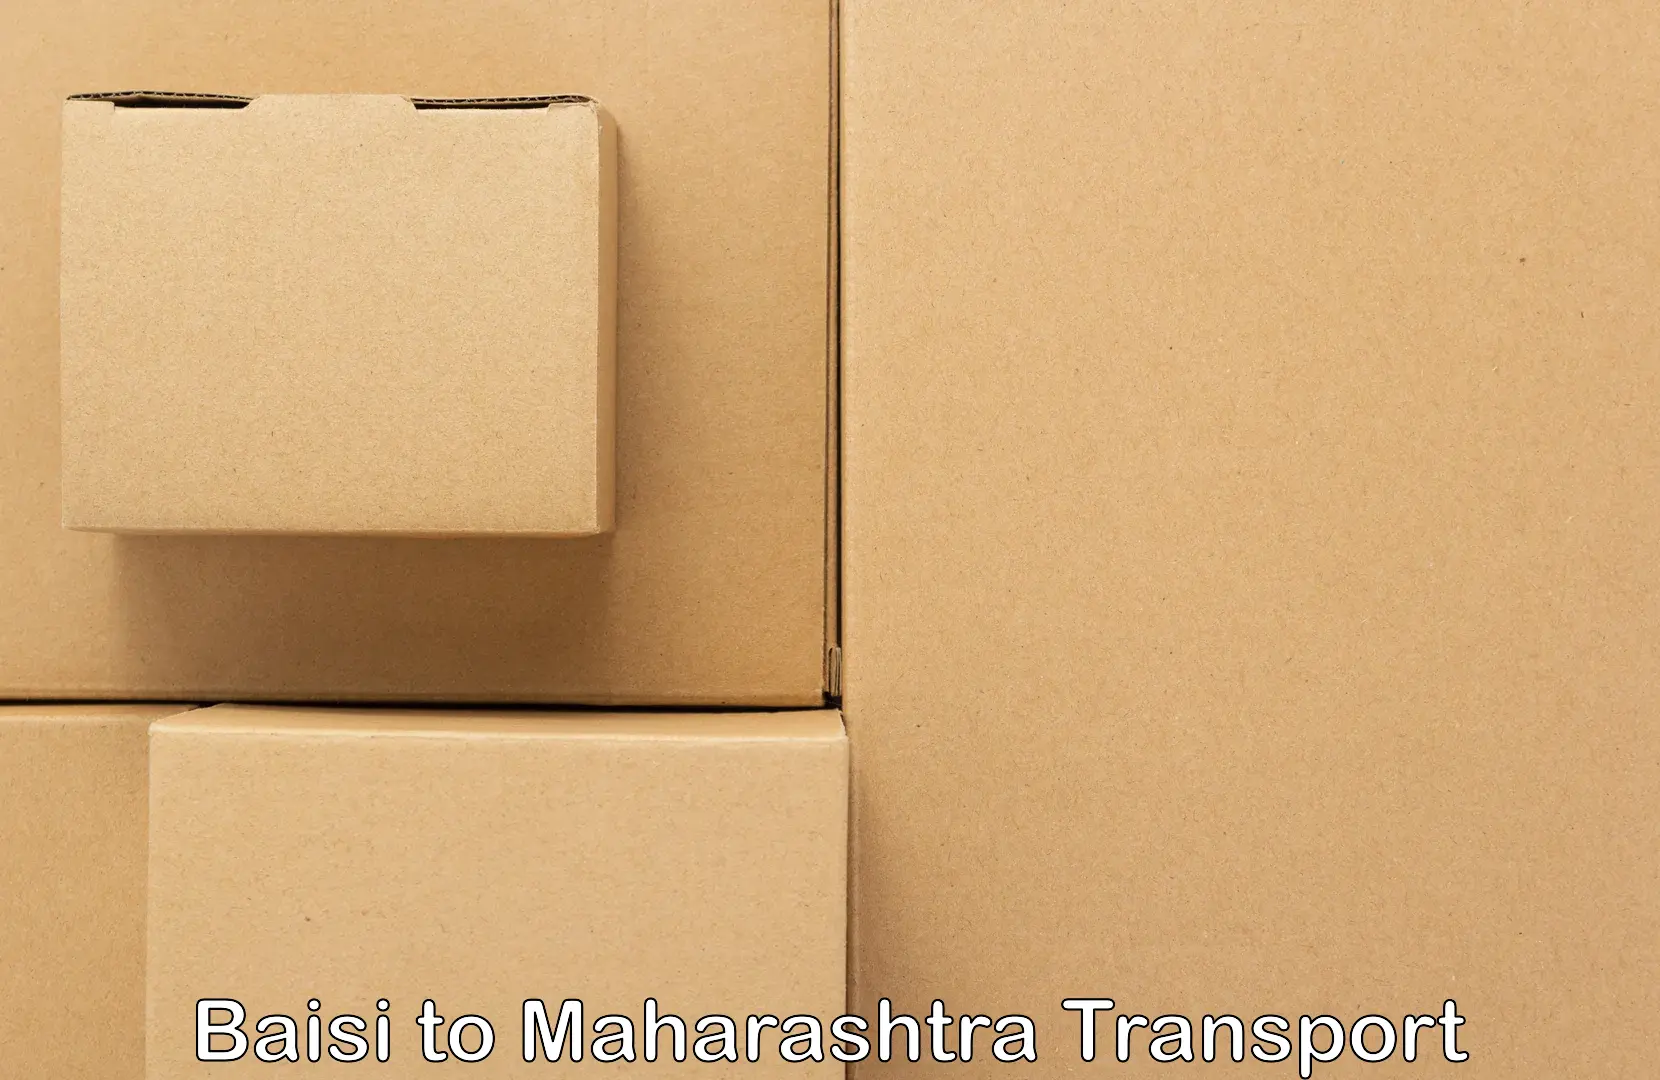 Air freight transport services in Baisi to Uran Islampur